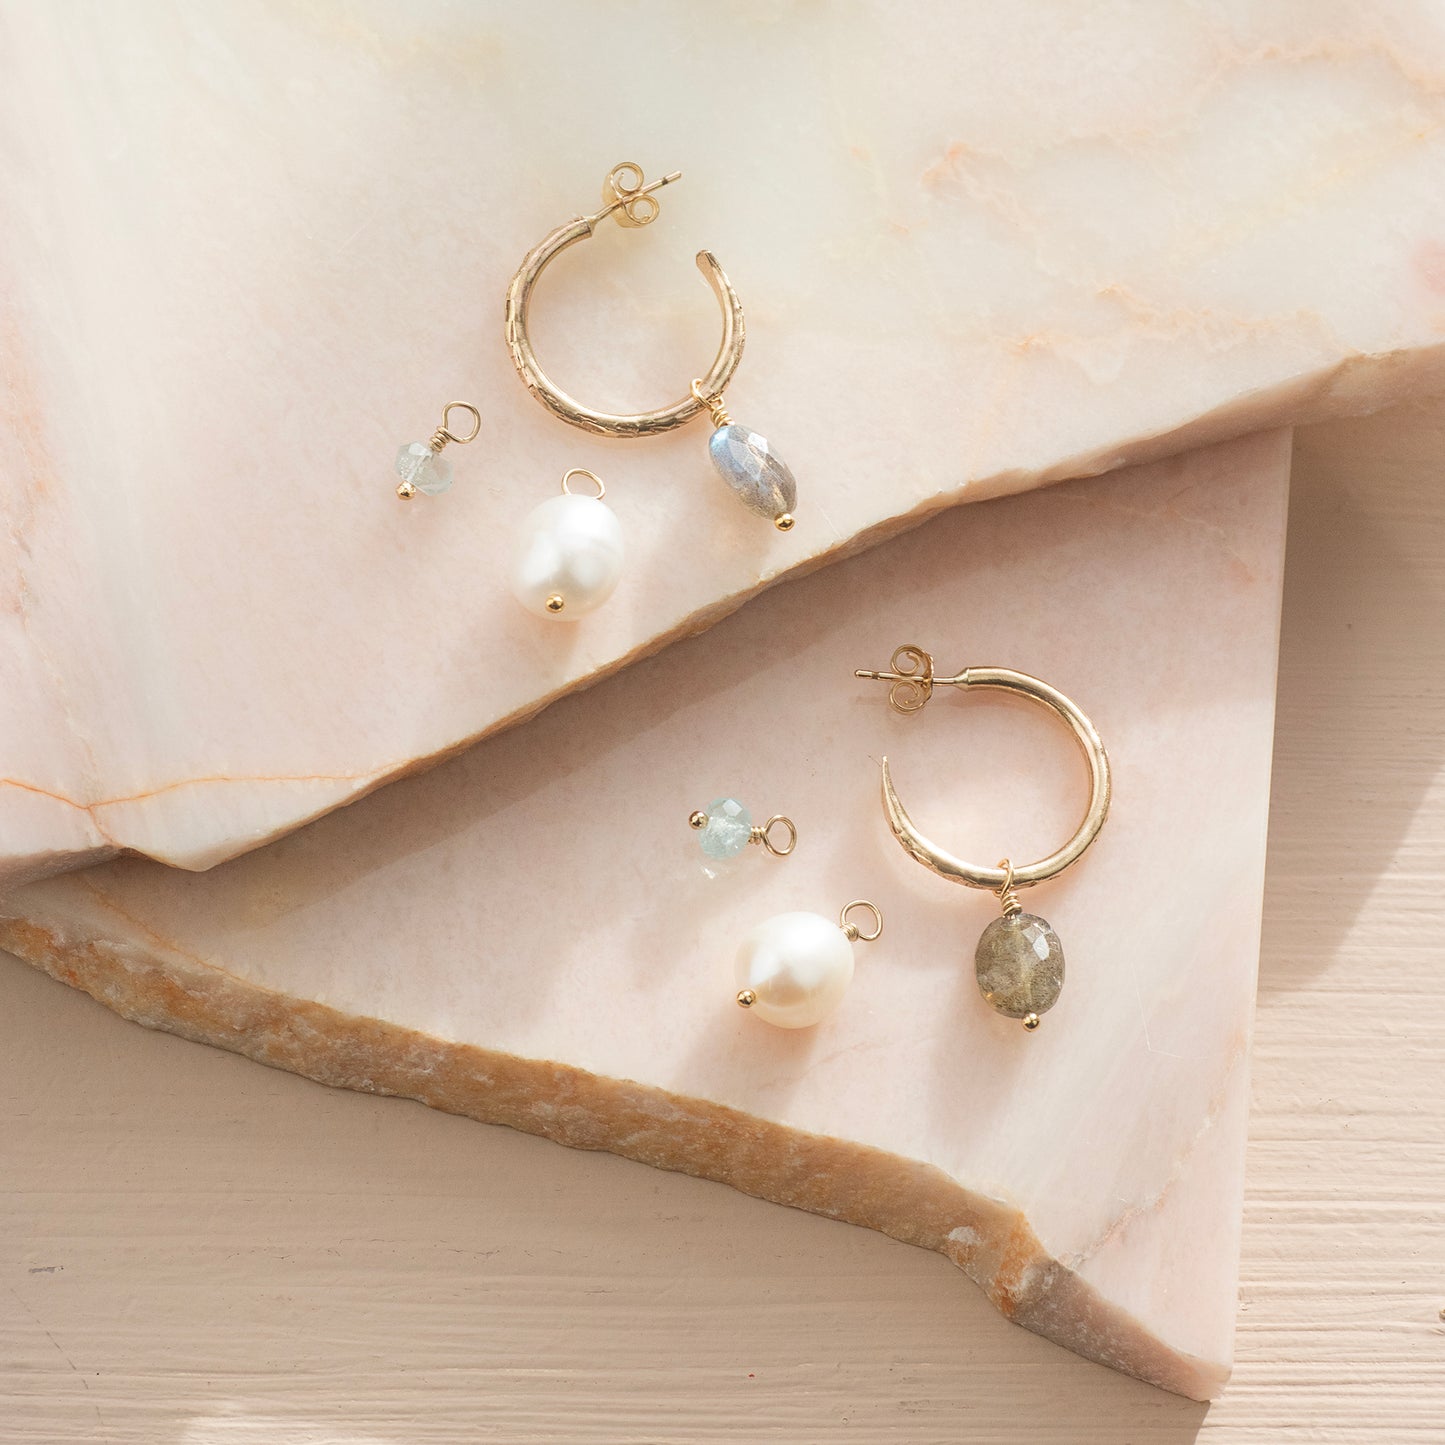 Petite Gold Hoops with 3 Charms - Pearl, Labradorite & Aquamarine